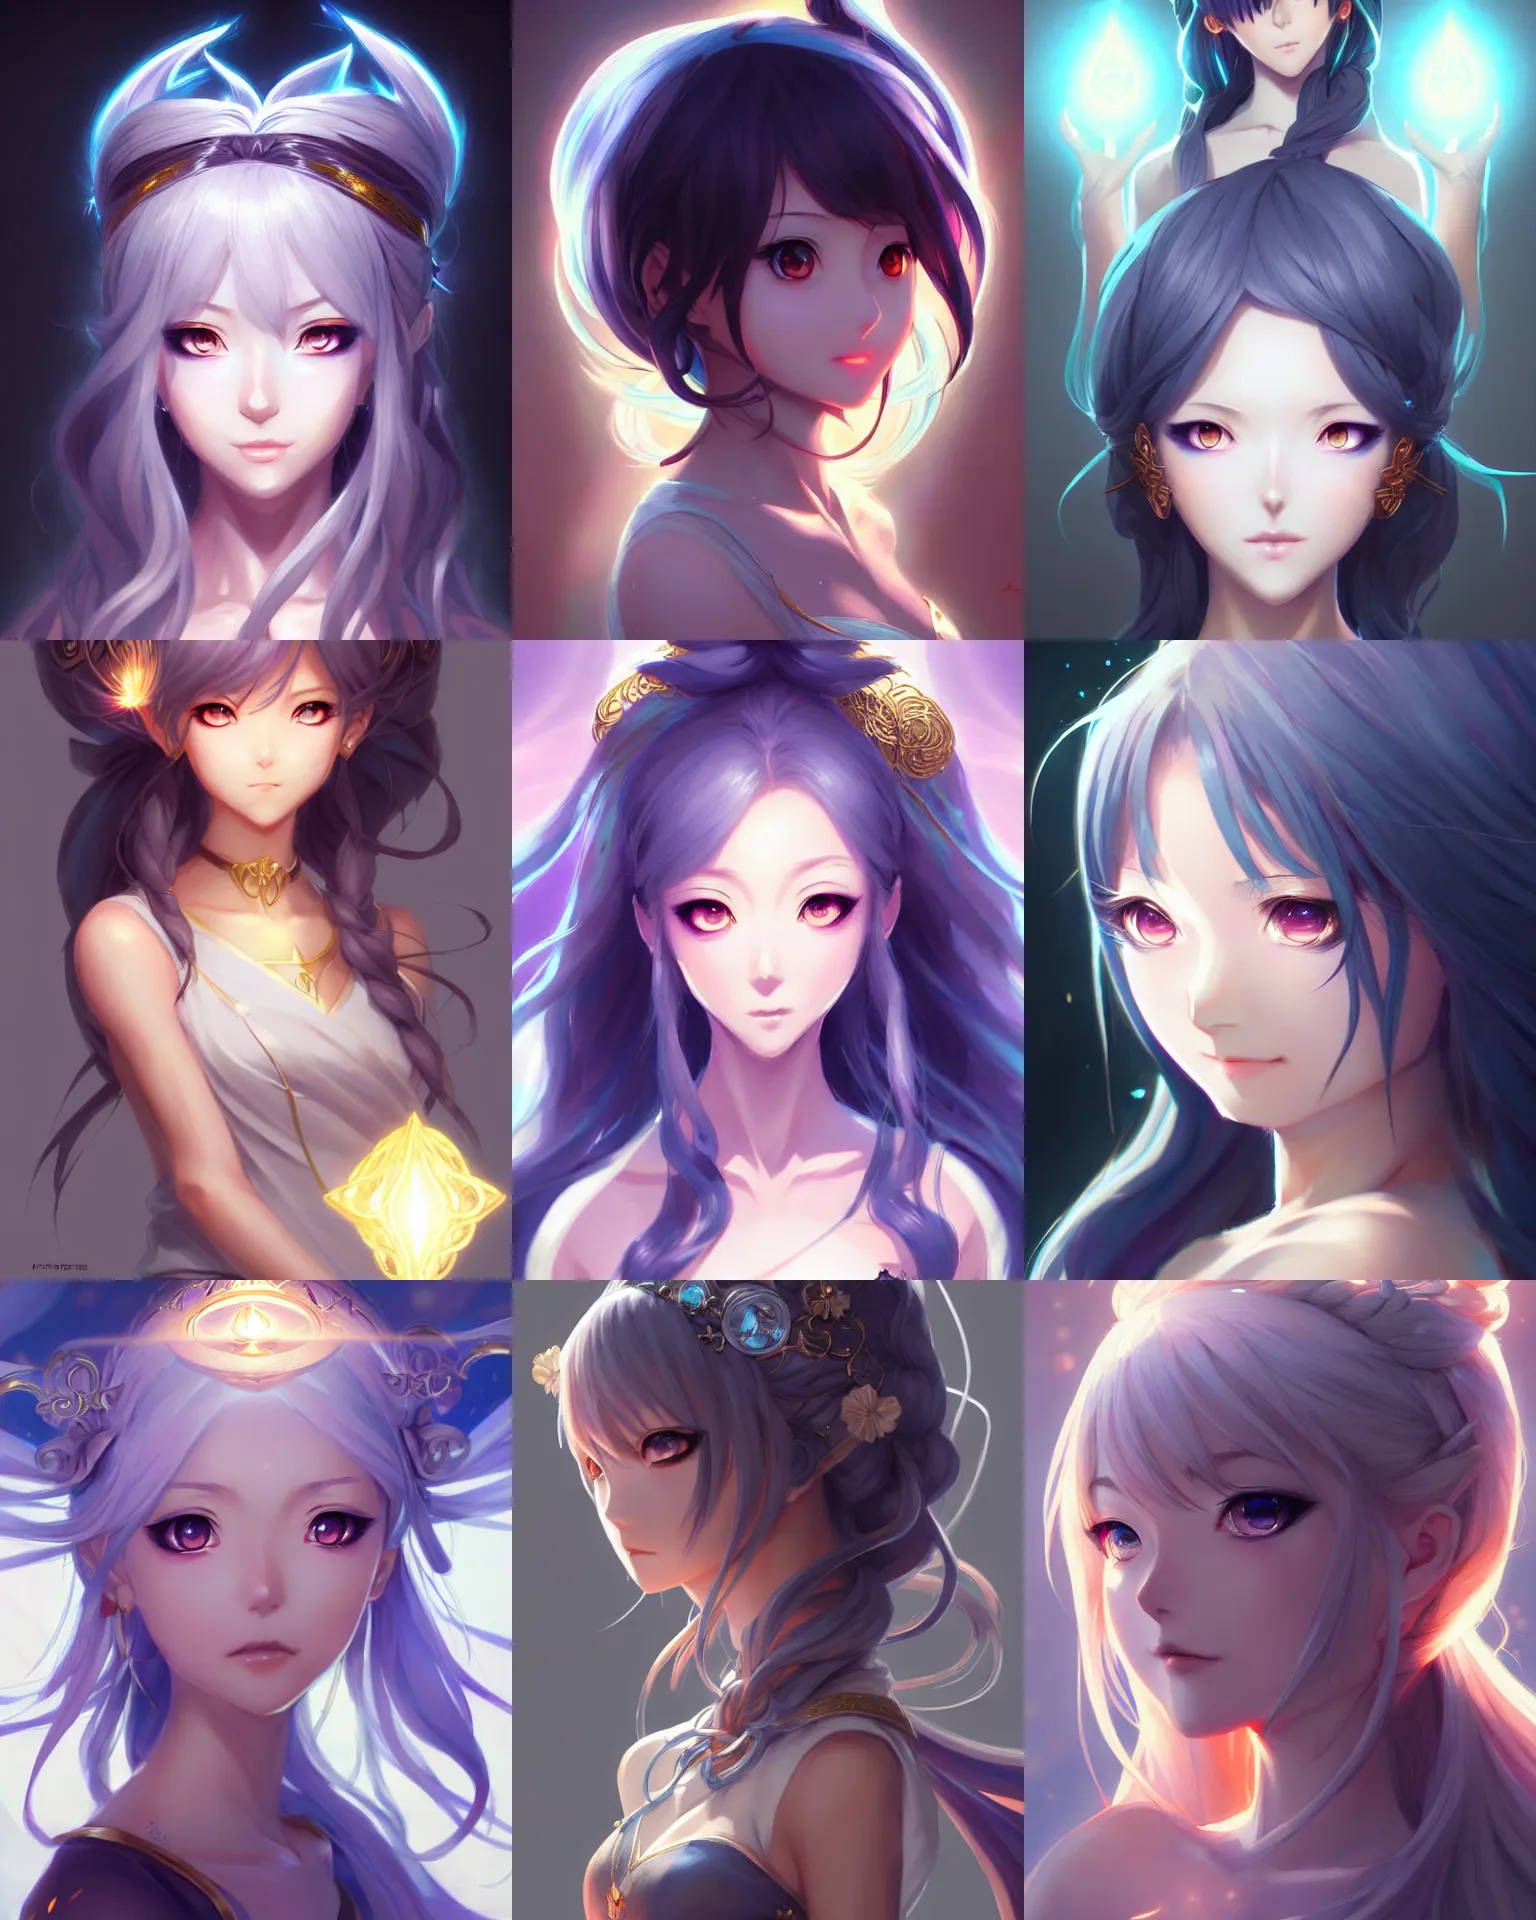 prompthunt: China,comics anime,dragon,goddess,angular shapes epic,in the  sky,fantasy,a beautiful  girl,moon,aura,princess,characters,dressed,robes,with  wings,women,nebula,detailed face,semi-transparent cape,female,fairy,anime